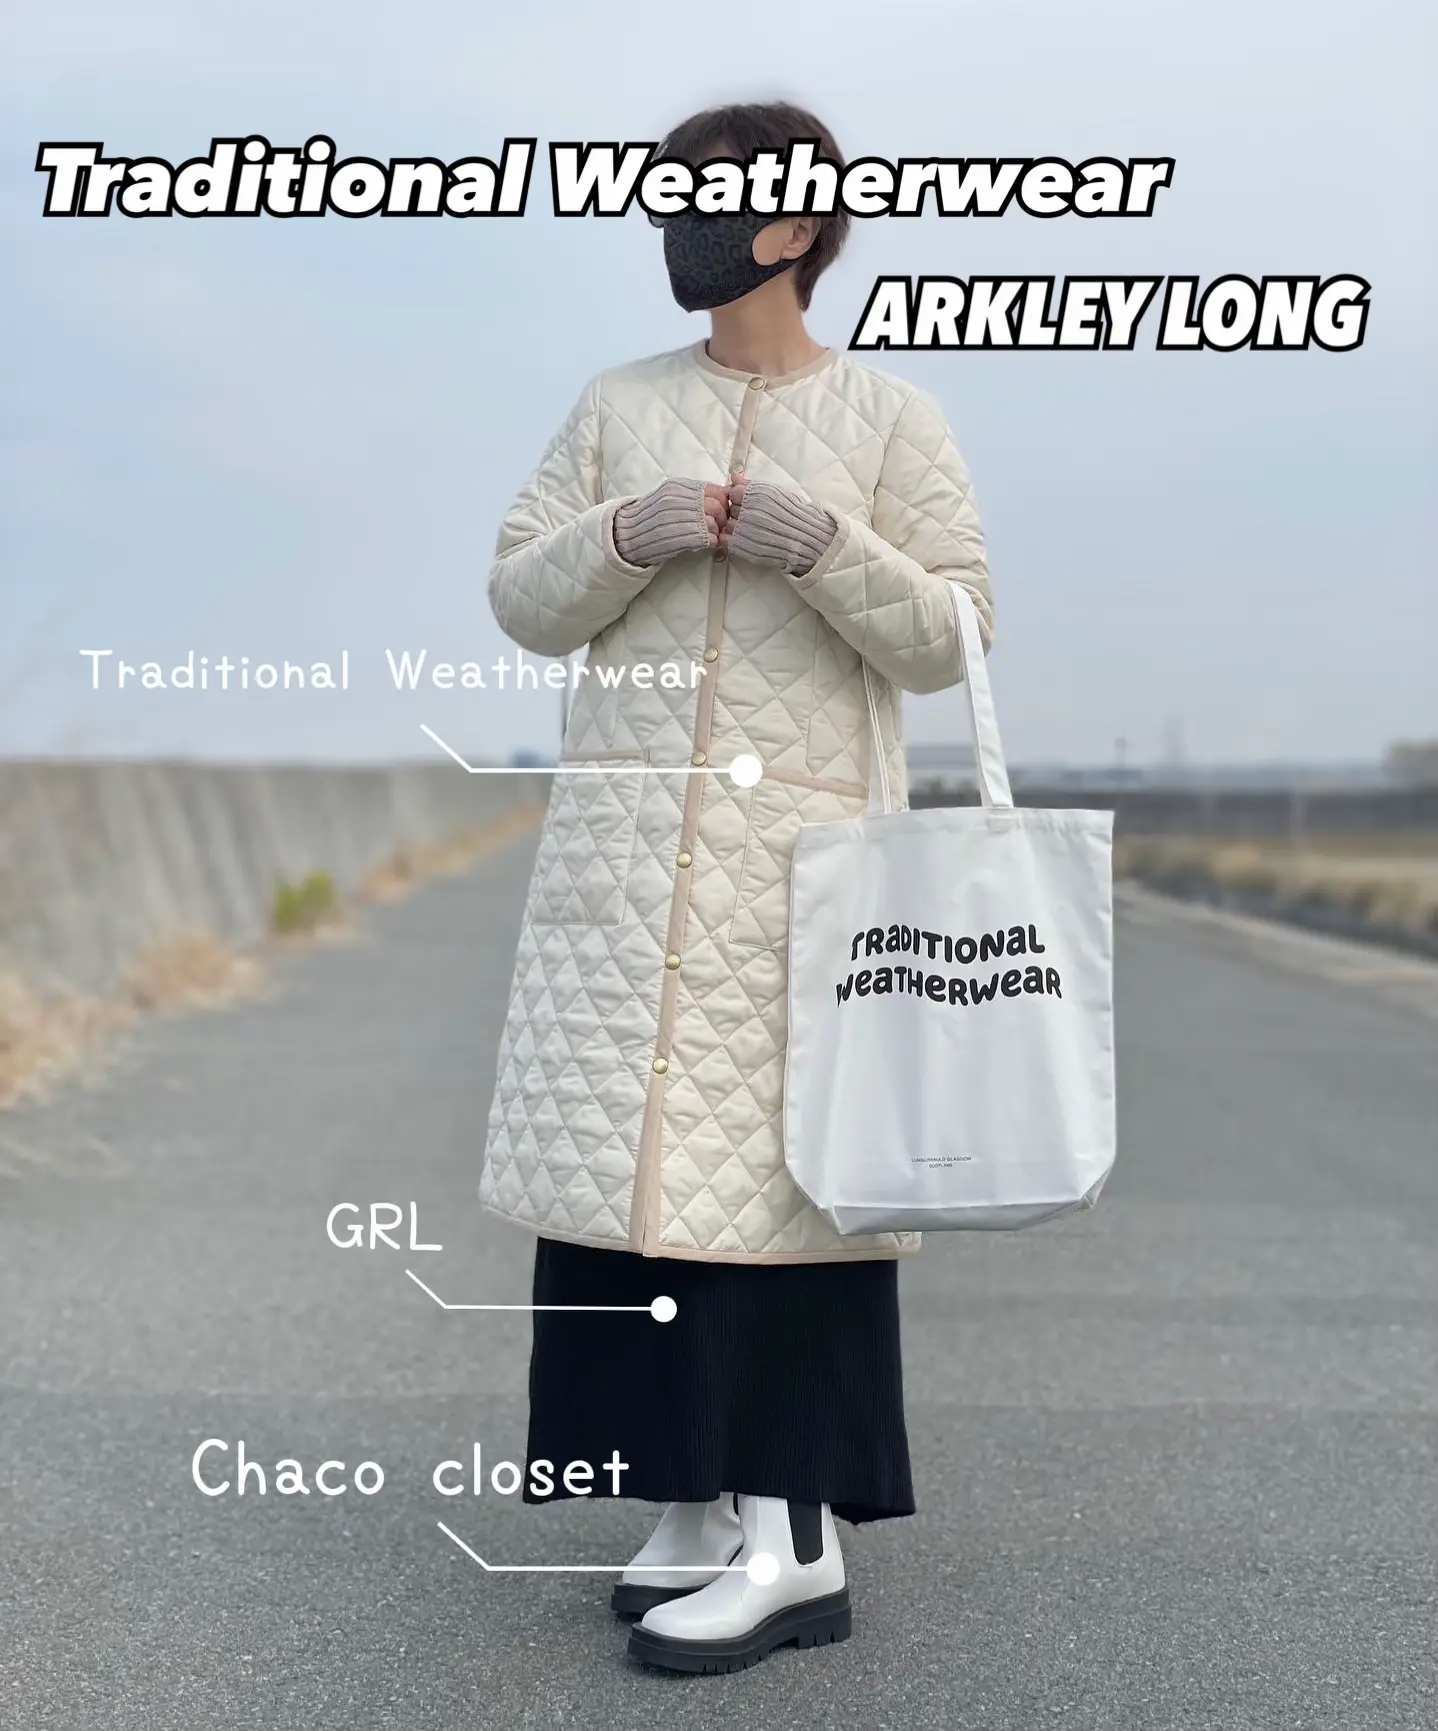 Traditional Weatherwear ARKLEY LONG | Gallery posted by Ma | Lemon8